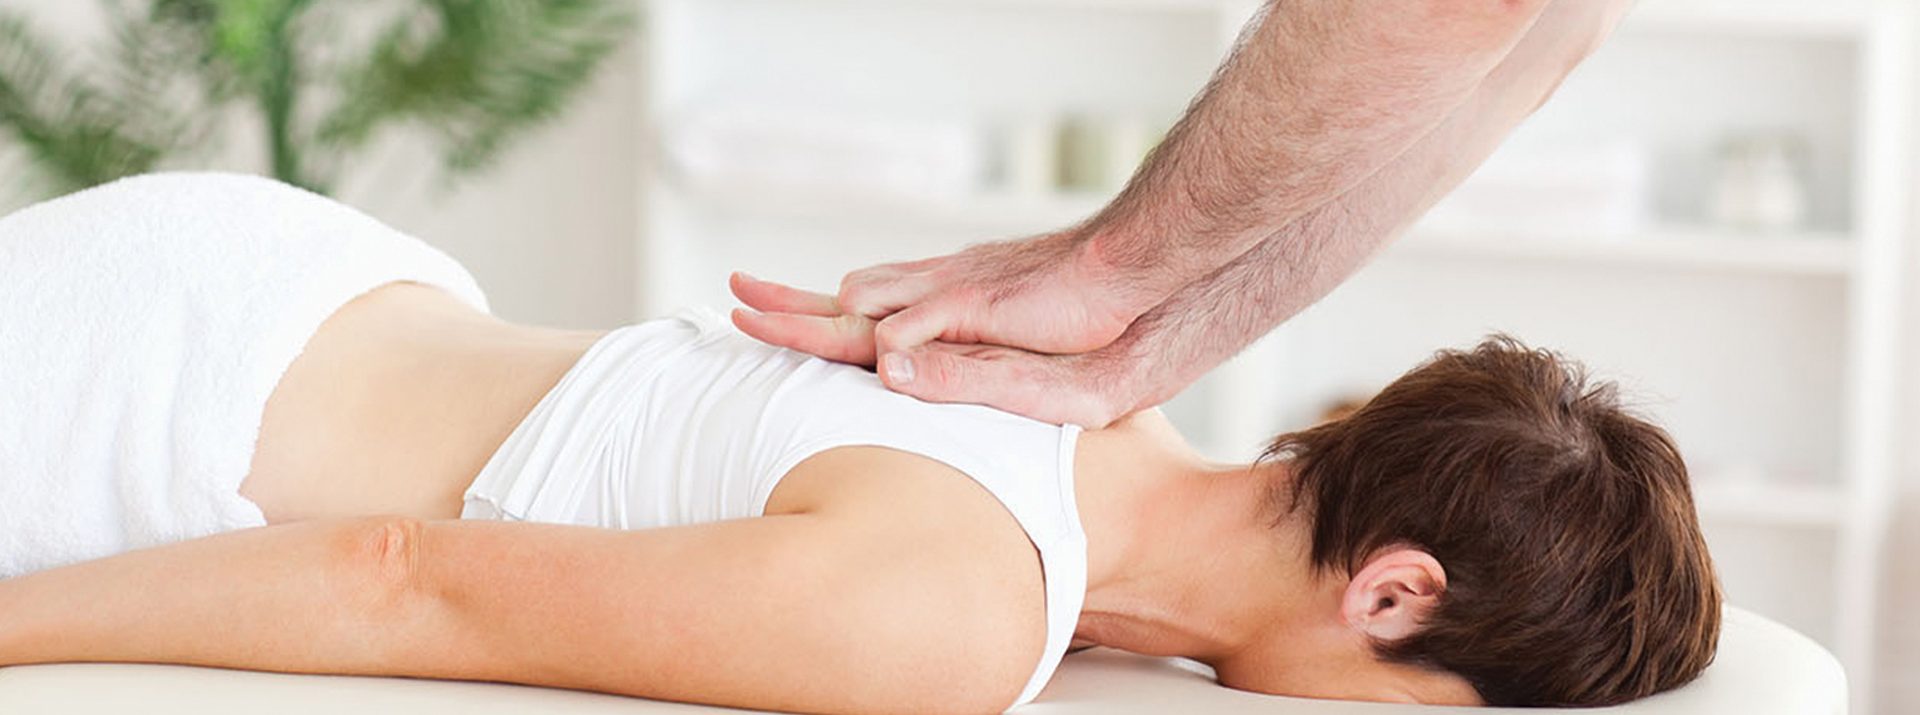 We are a unique chiropractic clinic